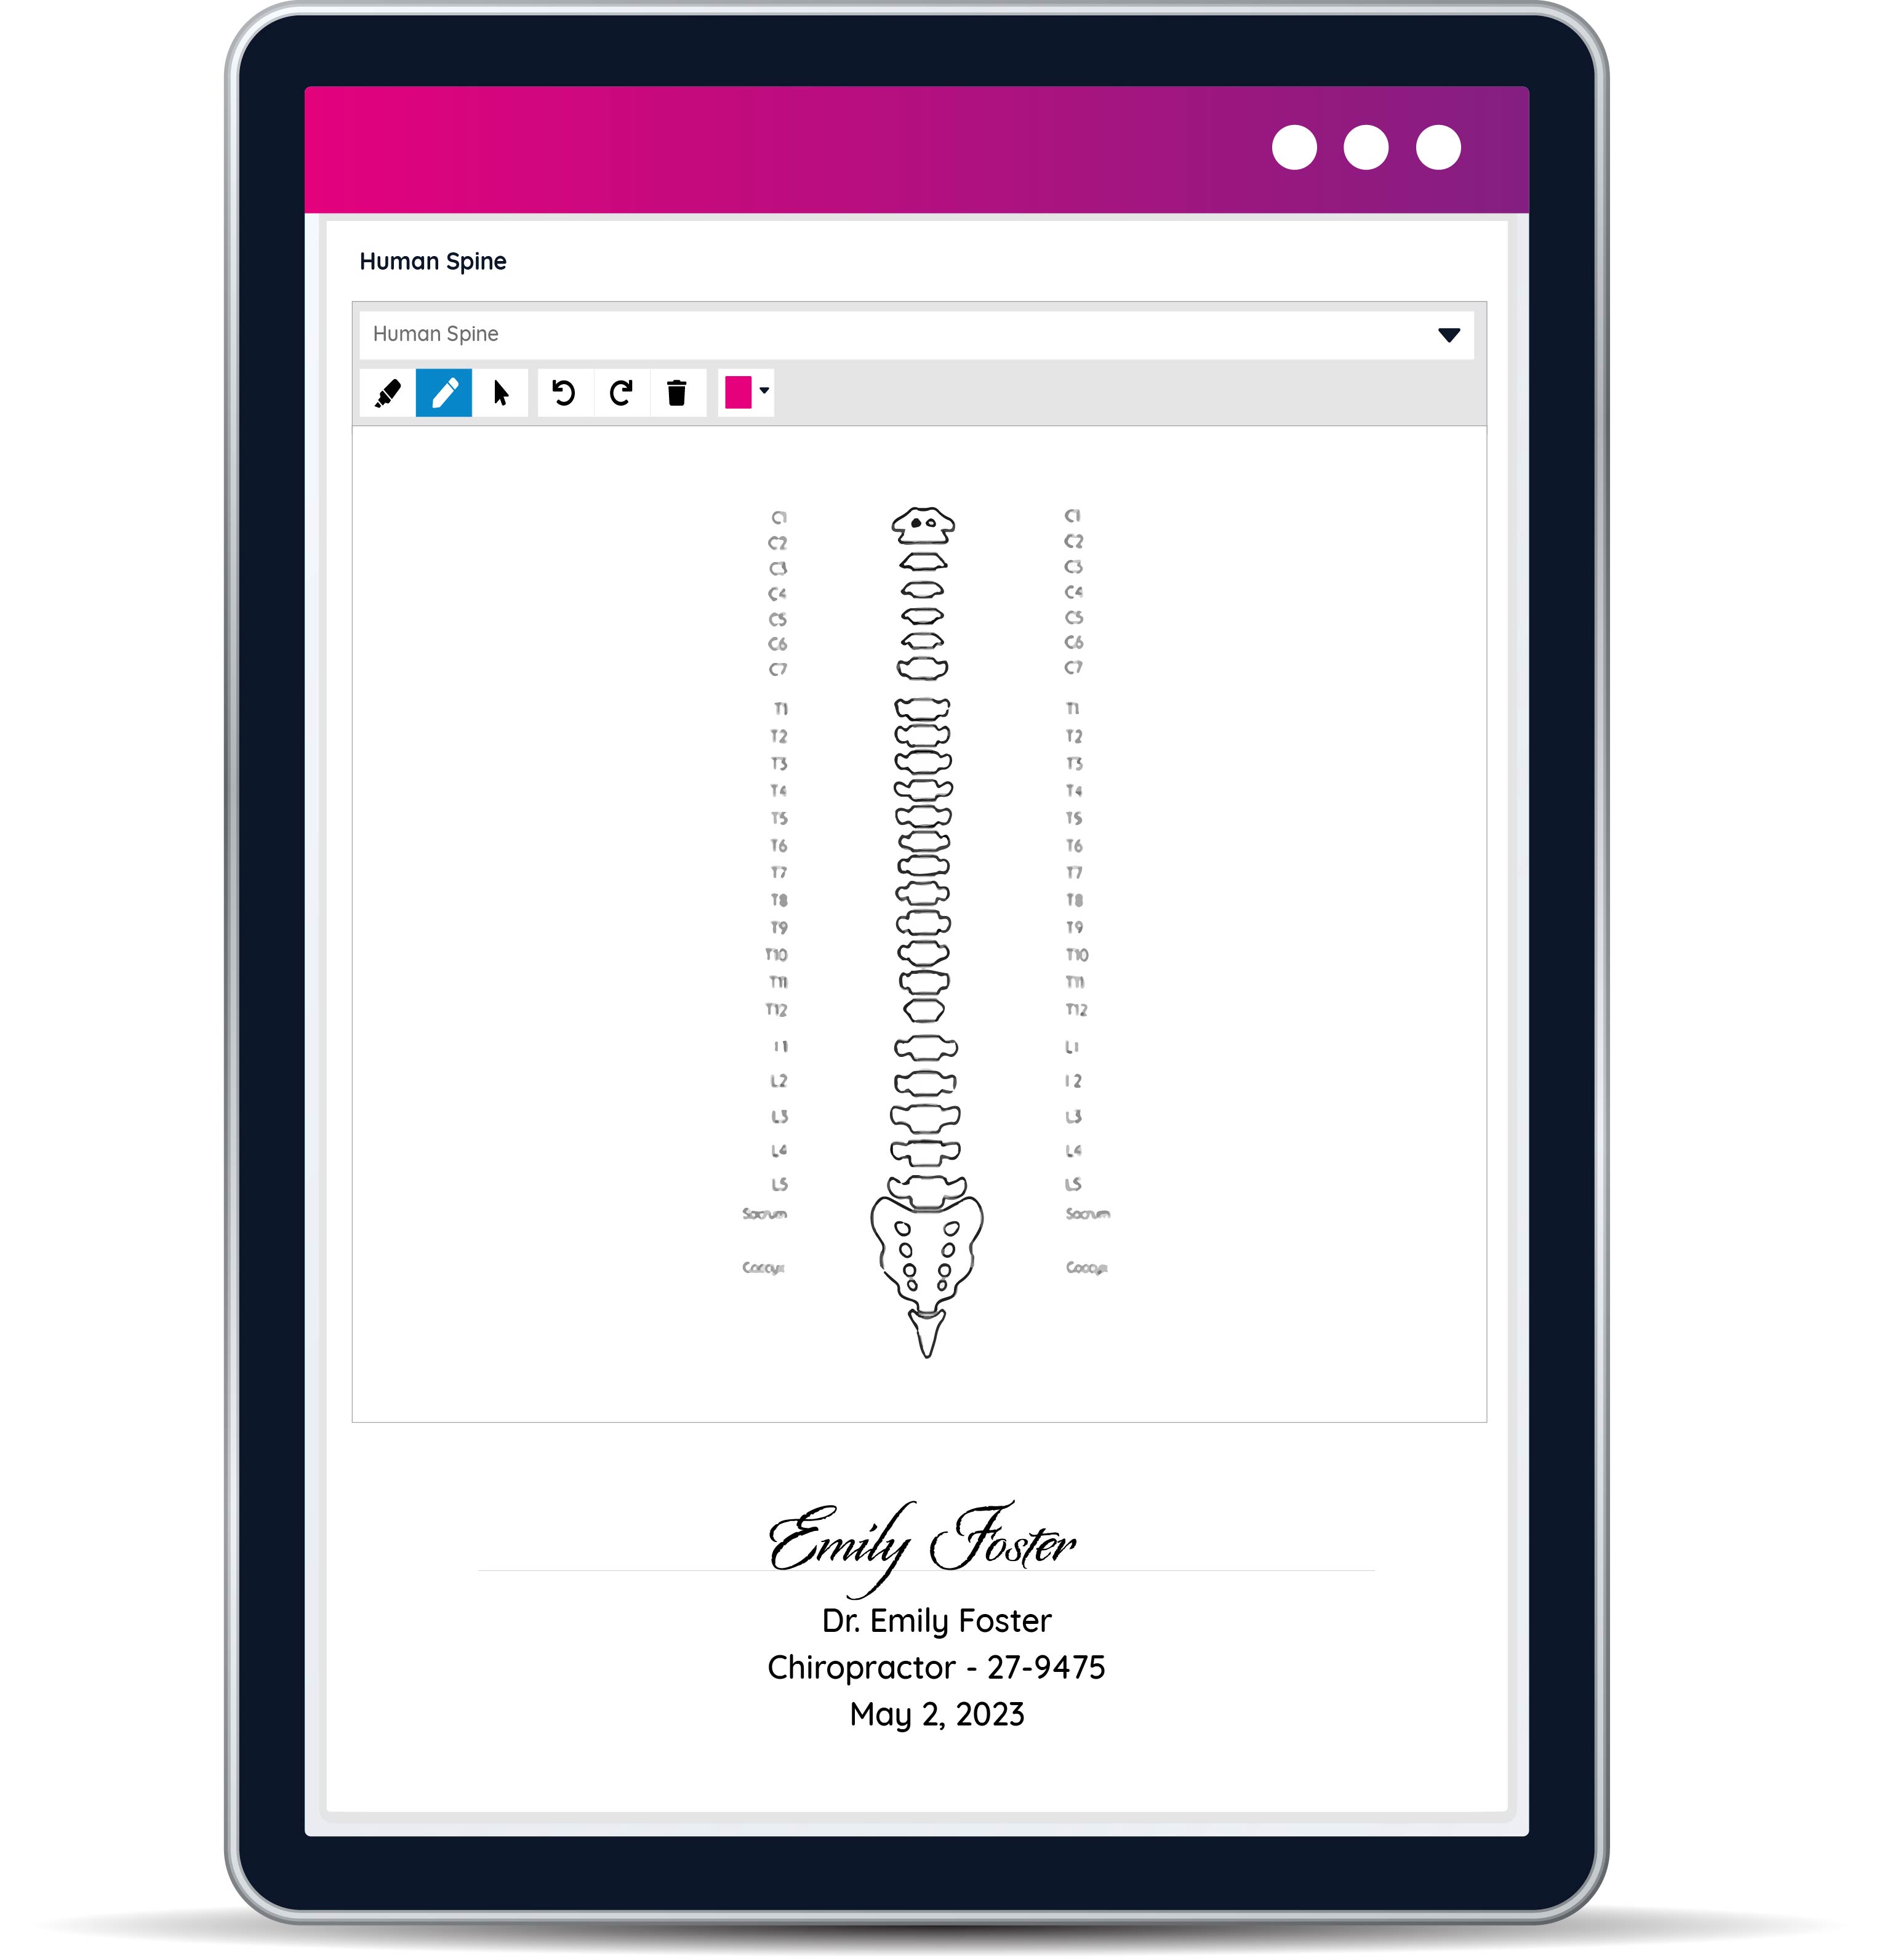 The empty charting file of a chiropractor using GOrendezvous on an ipad